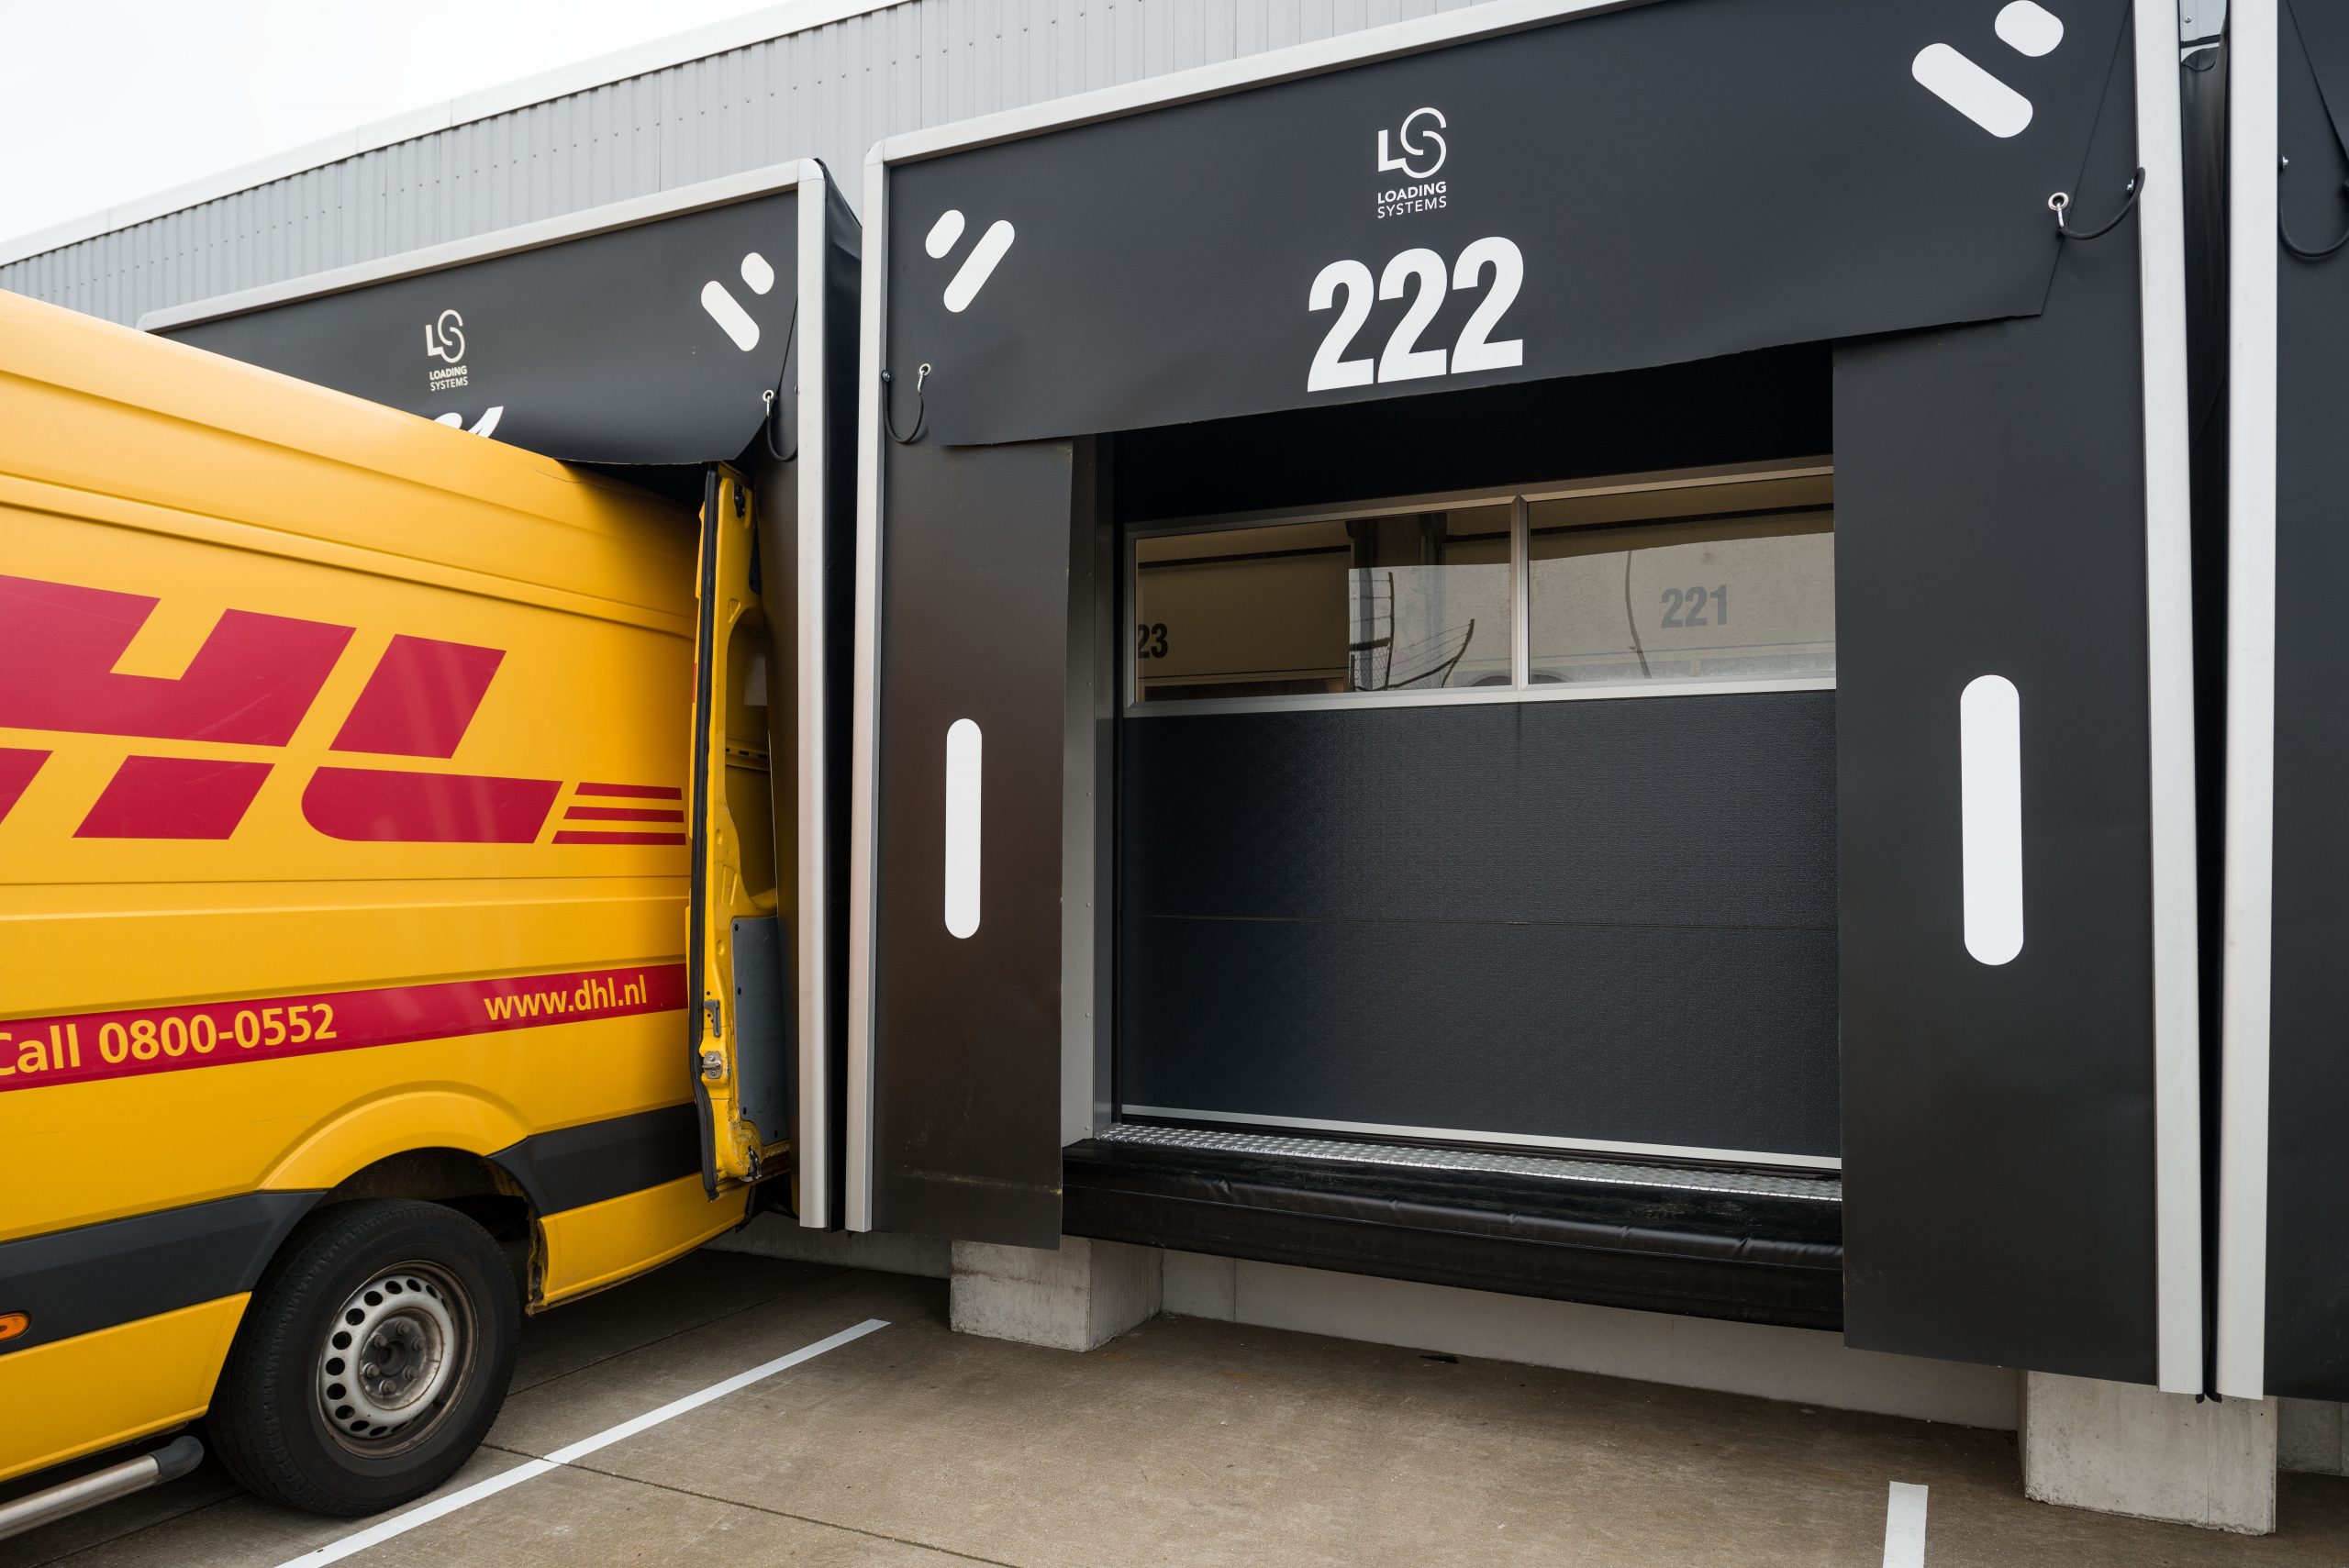 DHL loading dock with Compact doors